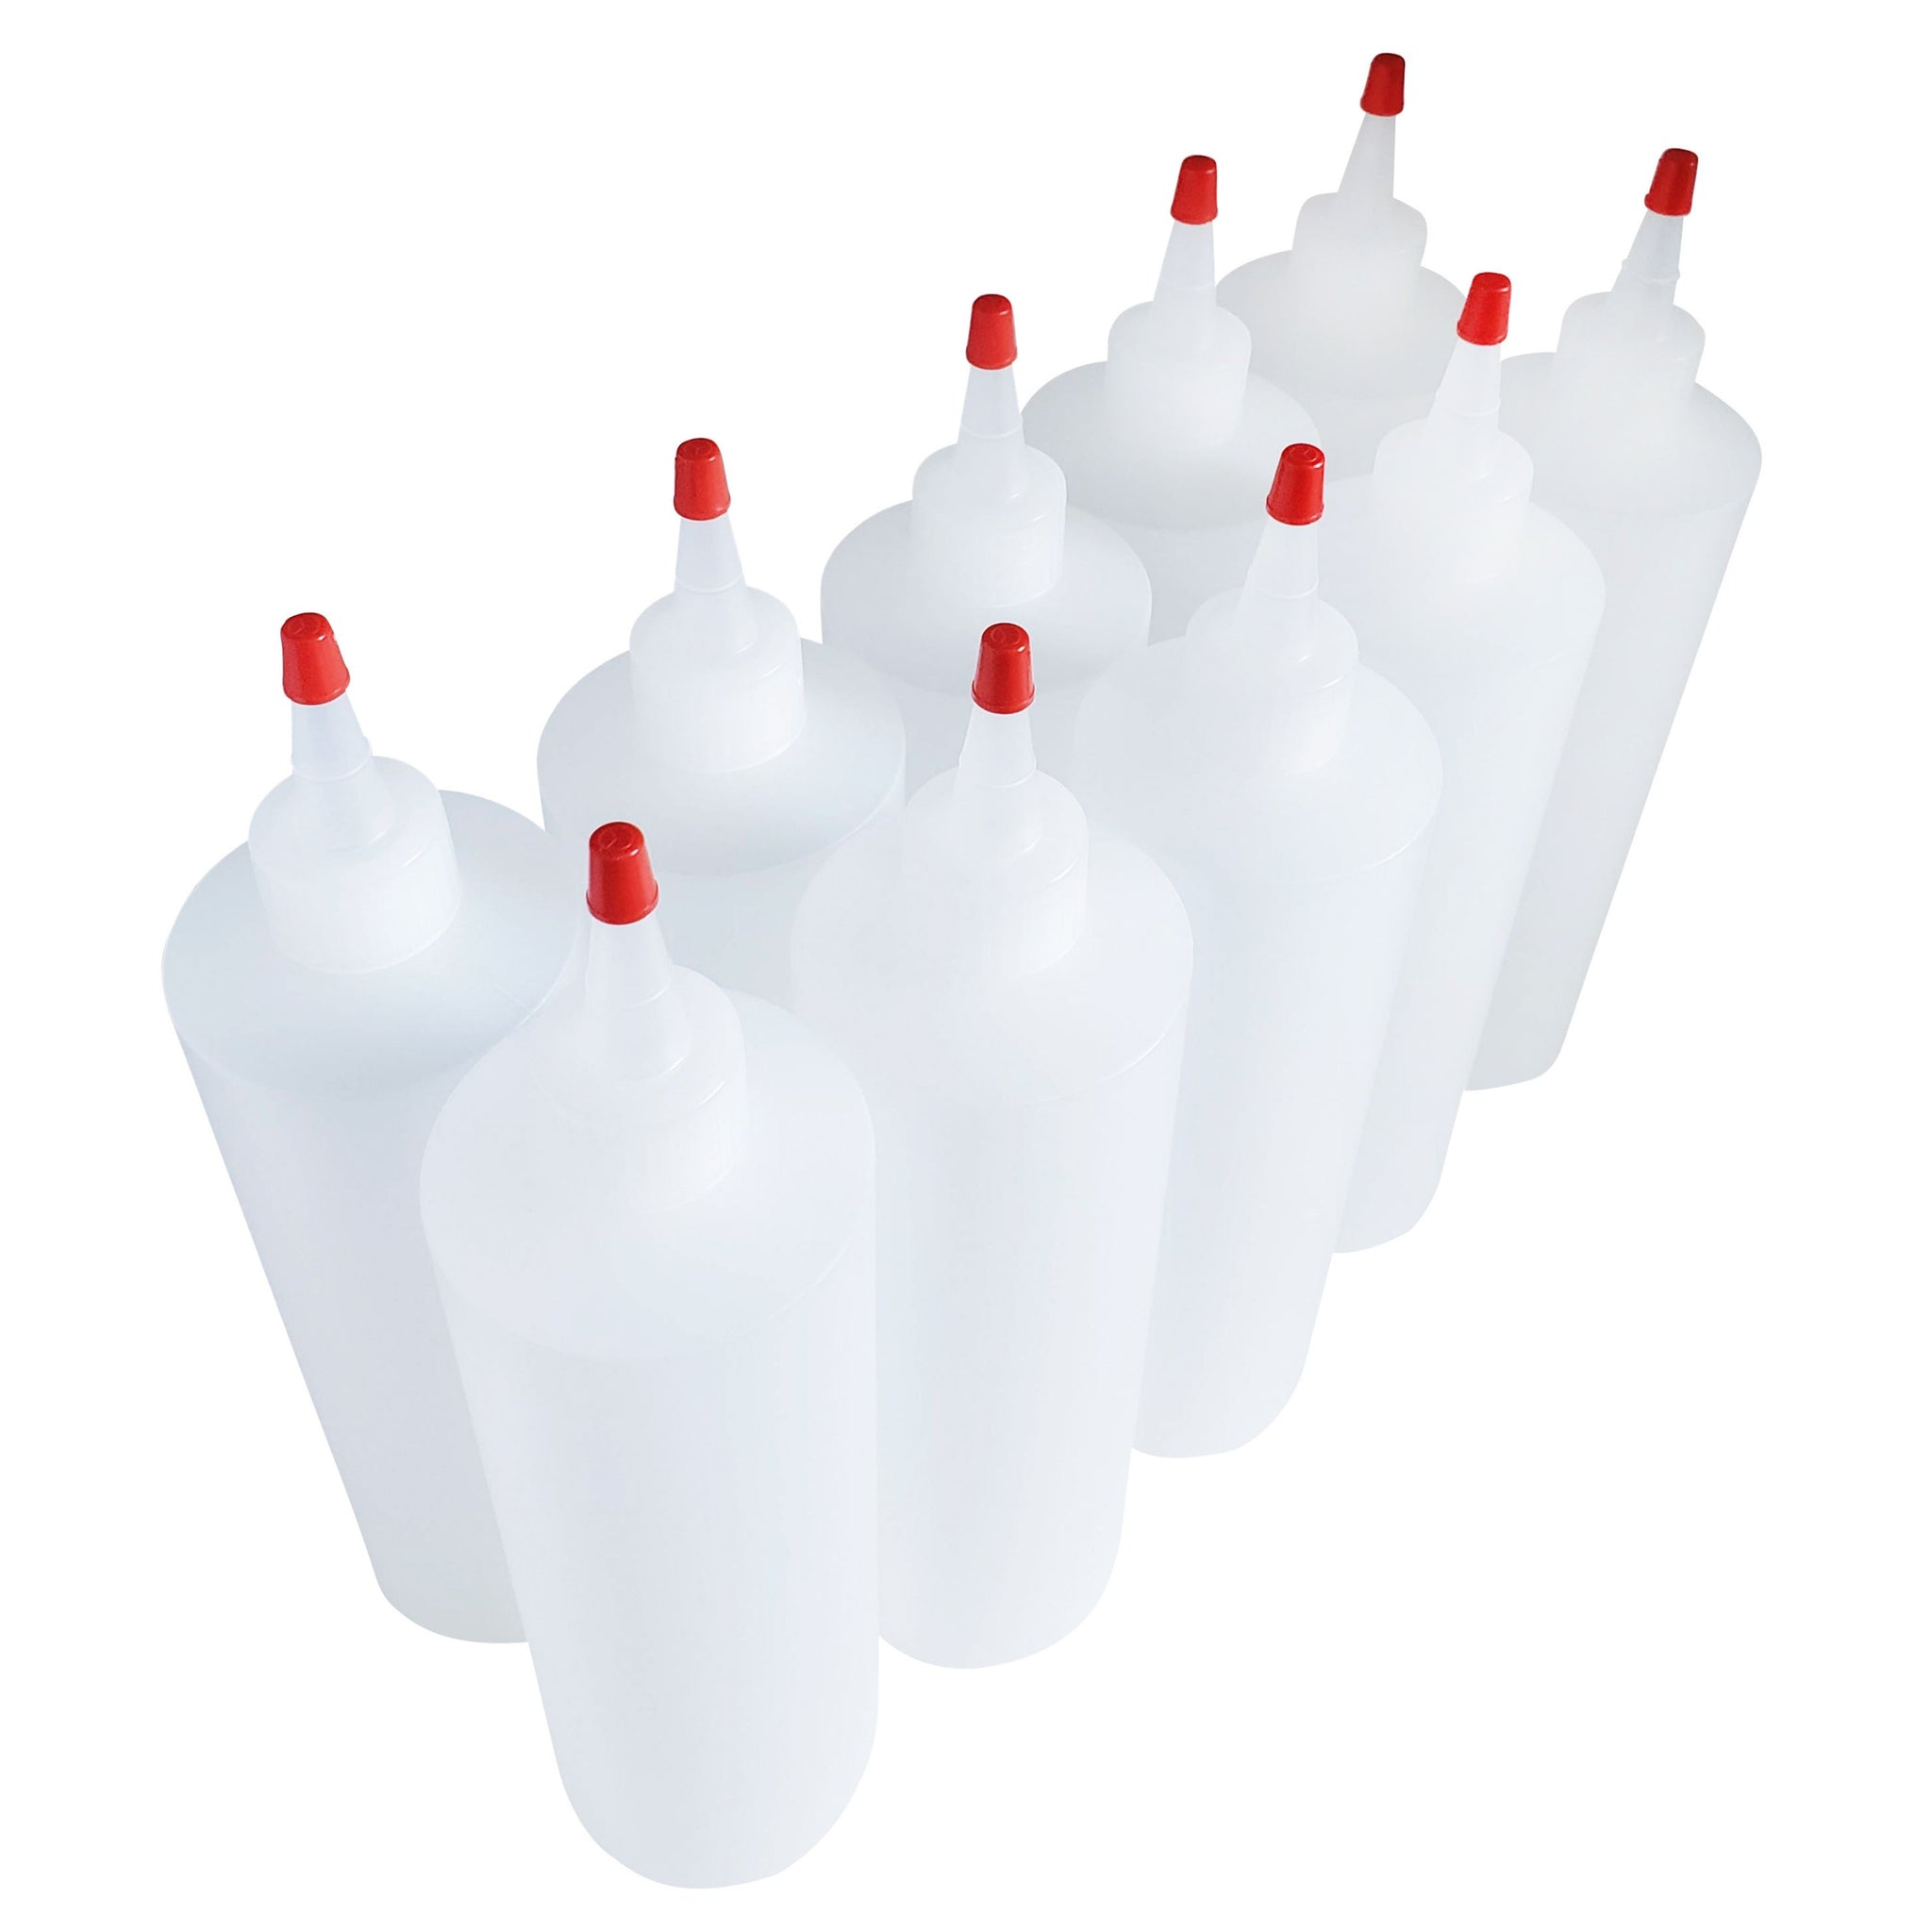 kelkaa 16oz HDPE Plastic Squeeze Bottles with Red Yorker Caps (Pack of